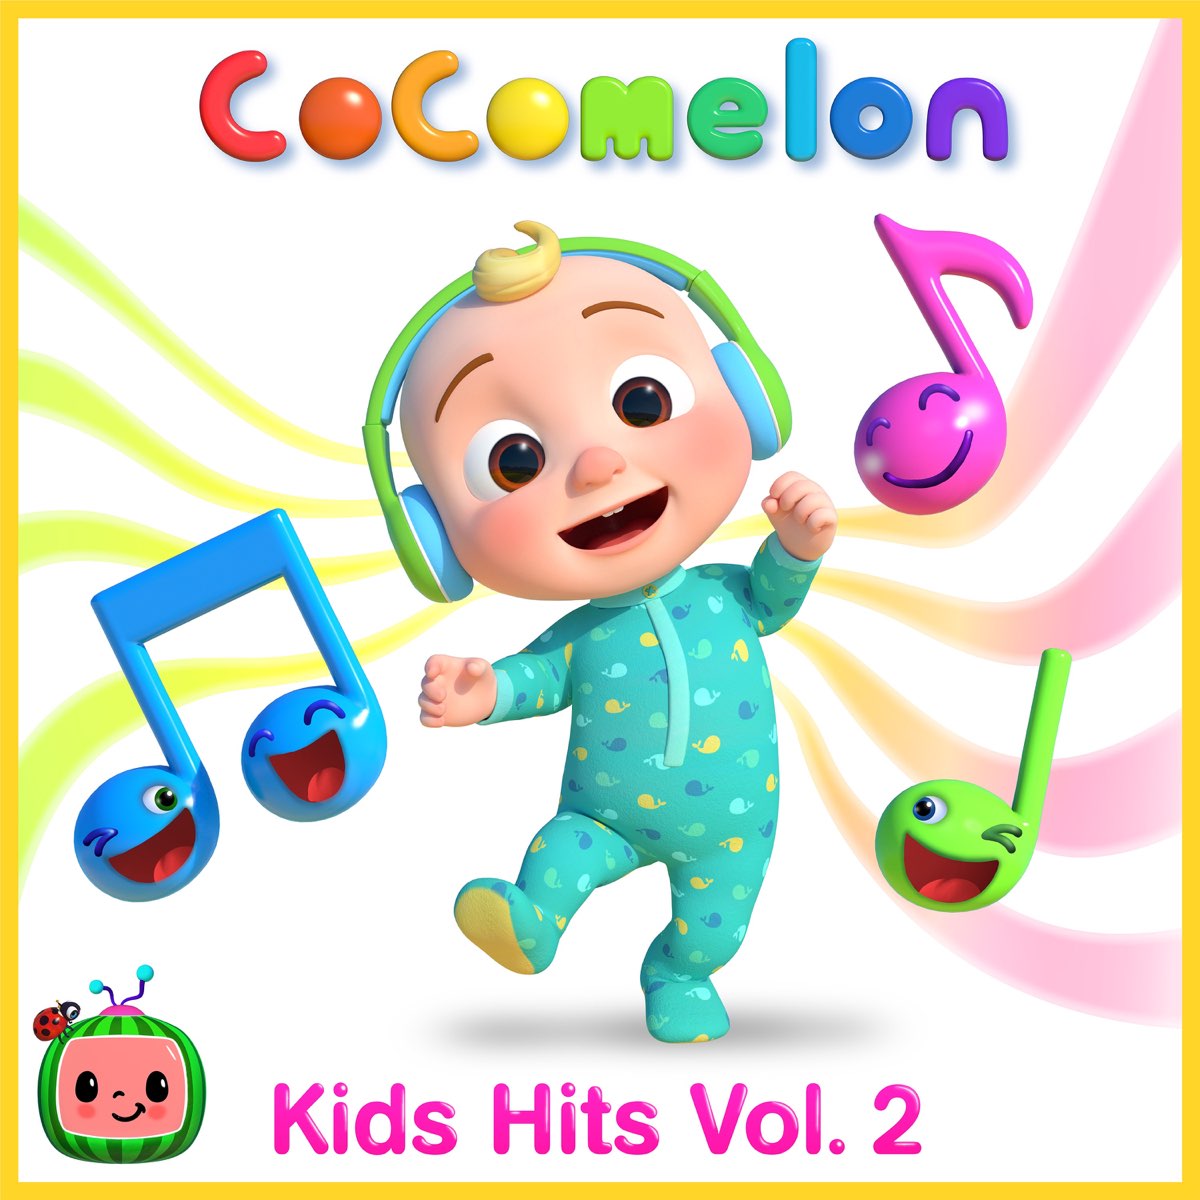 ‎CoComelon Kids Hits, Vol. 2 by CoComelon on Apple Music